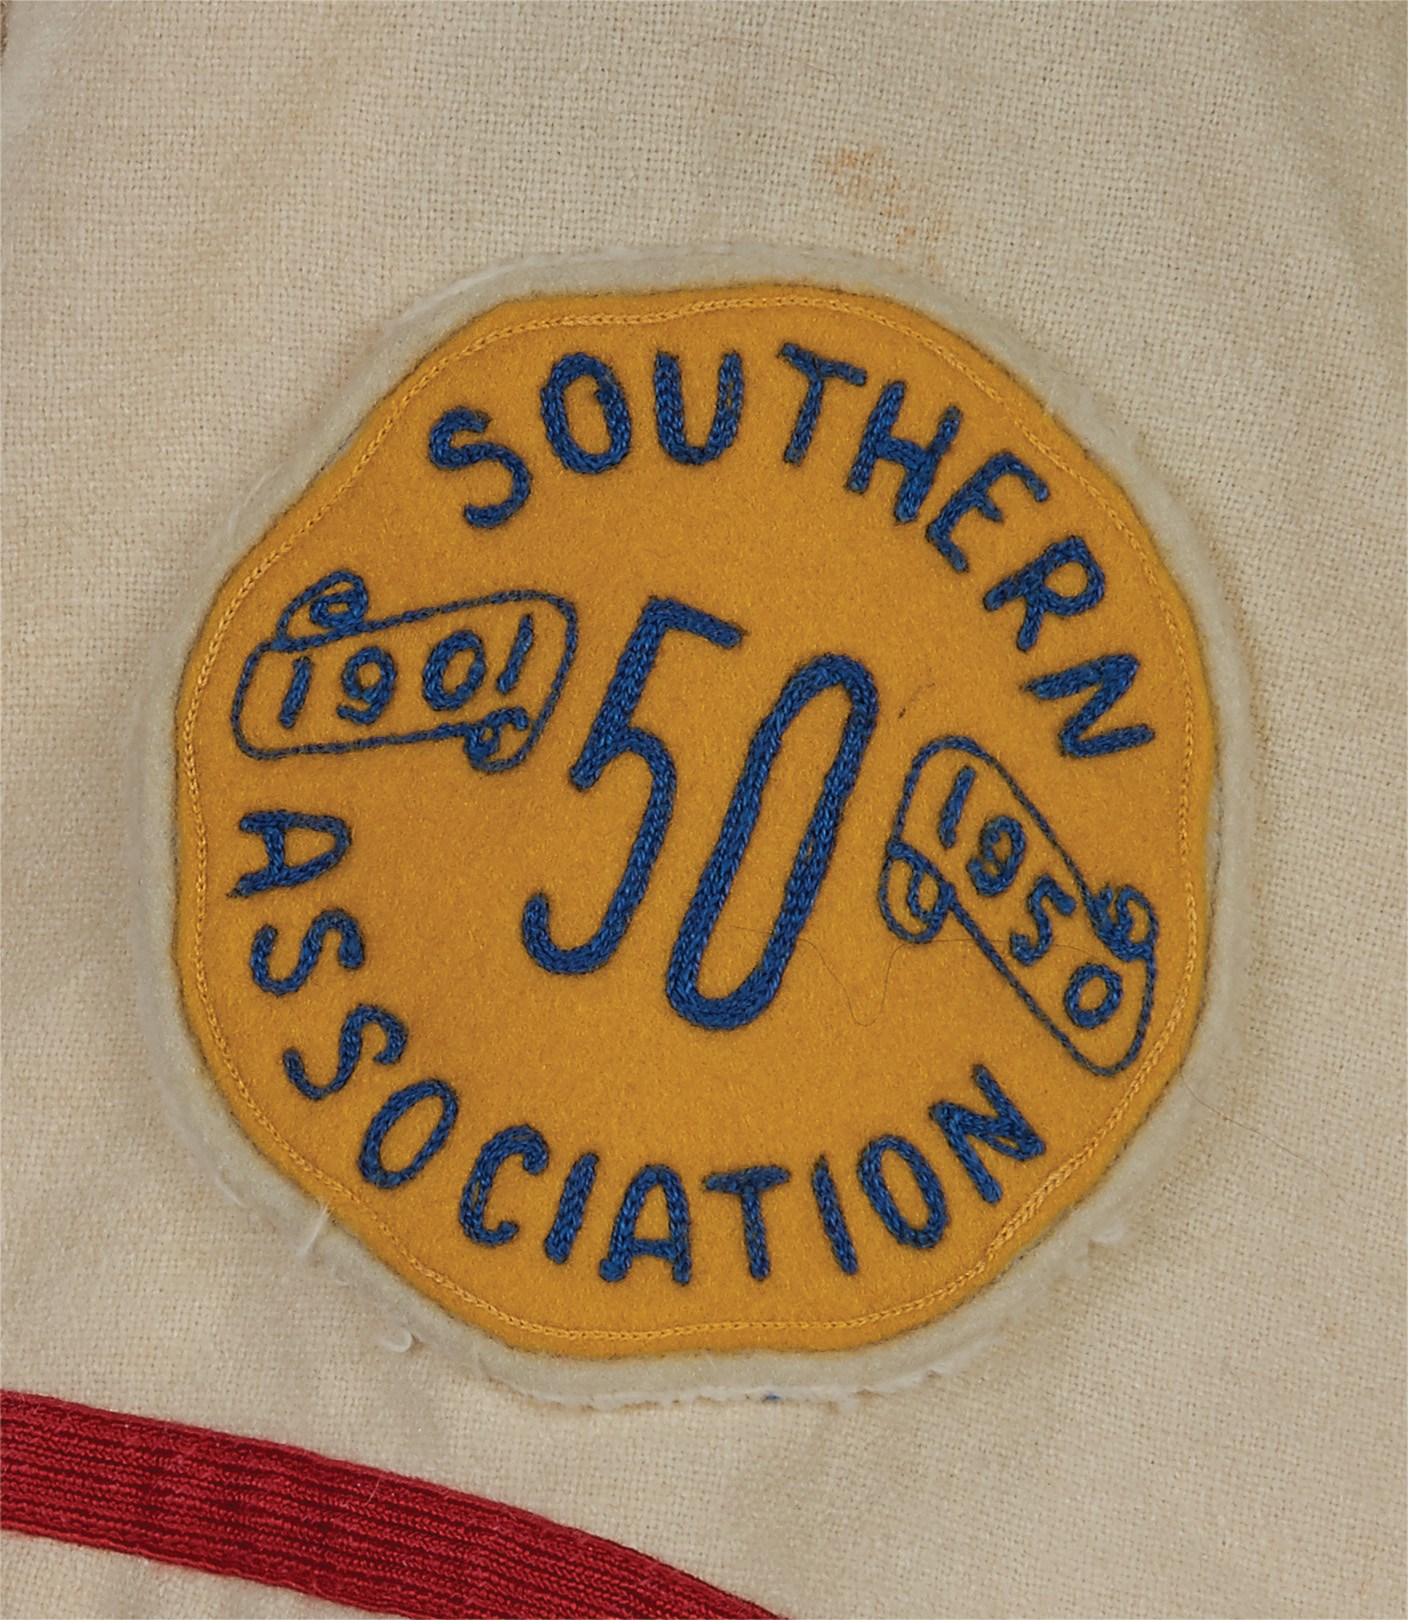 - Bobo Newsom 1950 Chattanooga Lookouts Uniform w/Golden Anniversary Southern Association Patch